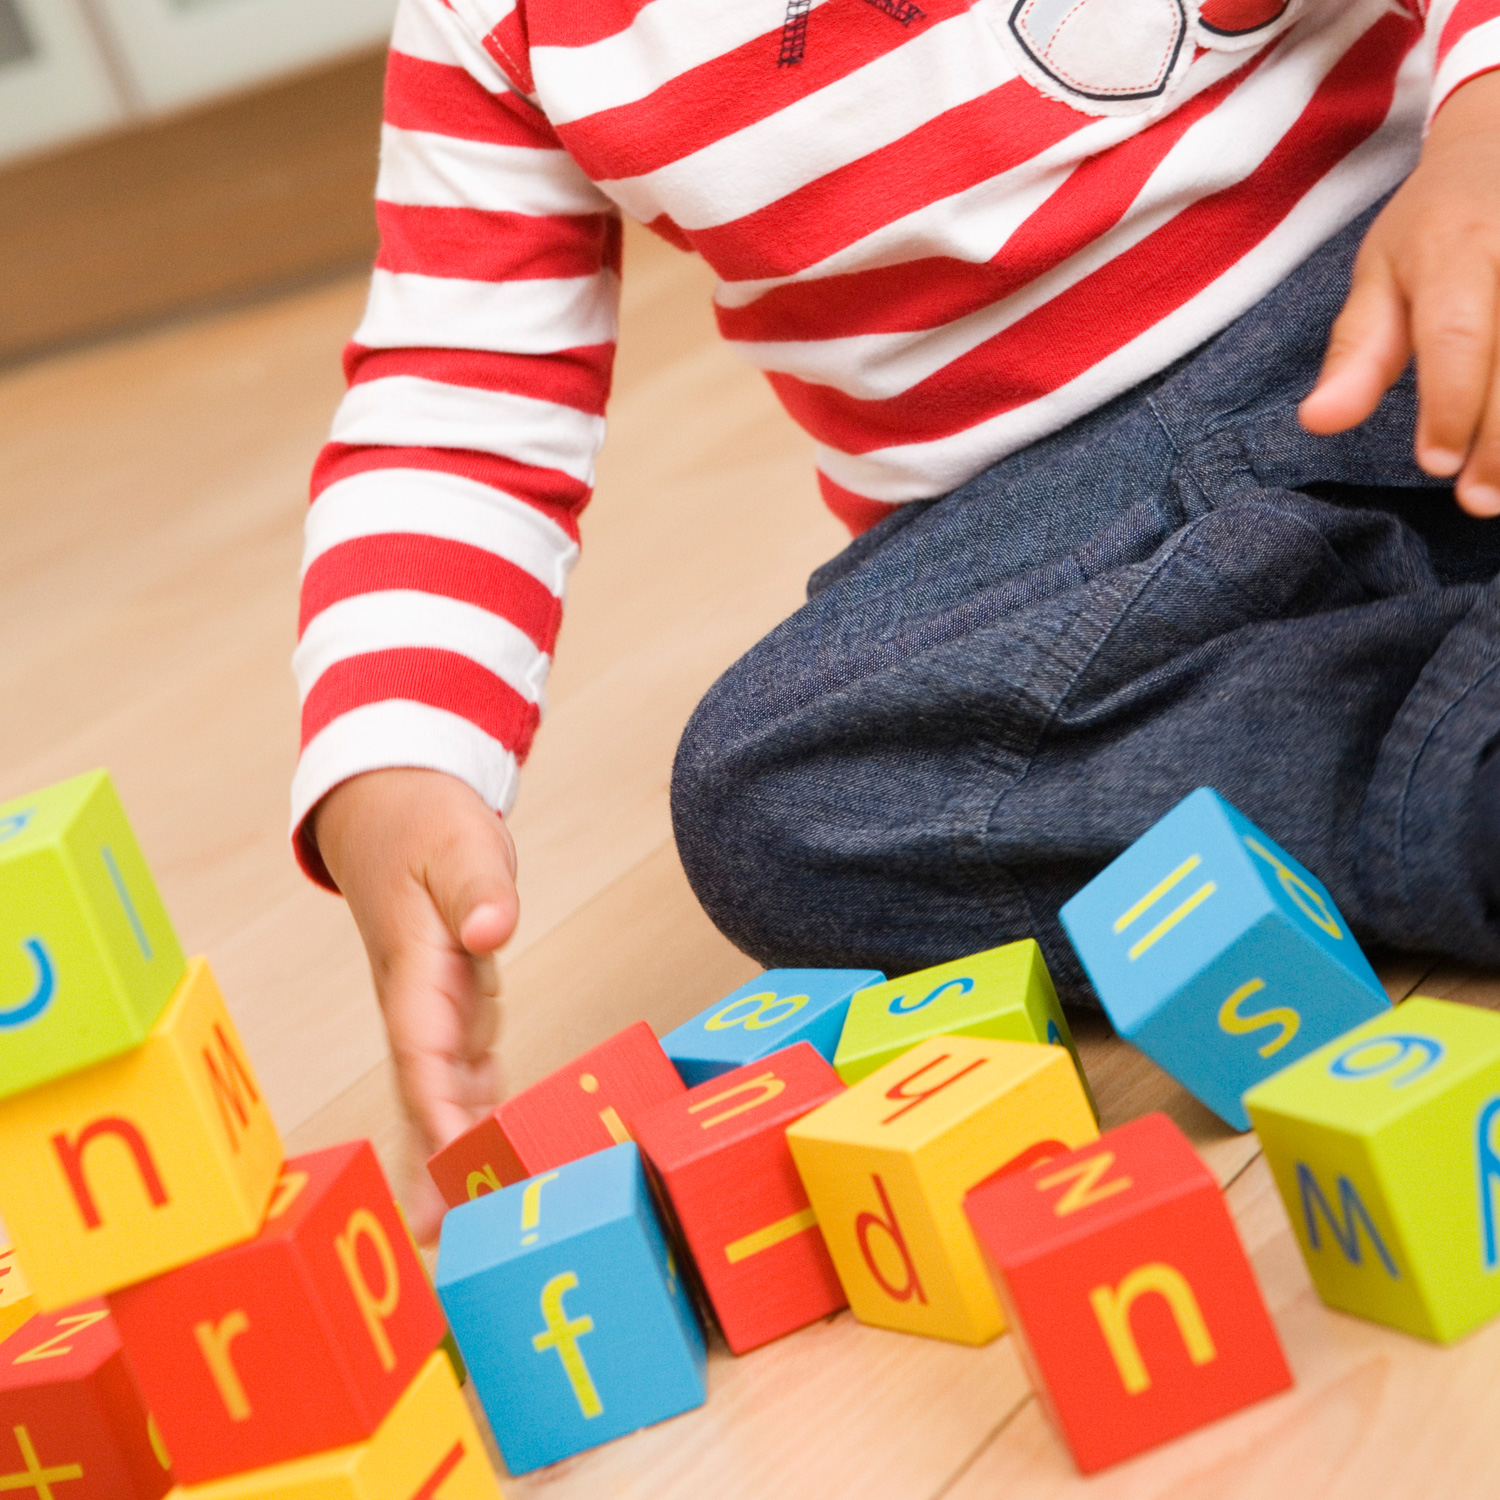 Letter teaching activities for babies and toddlers.